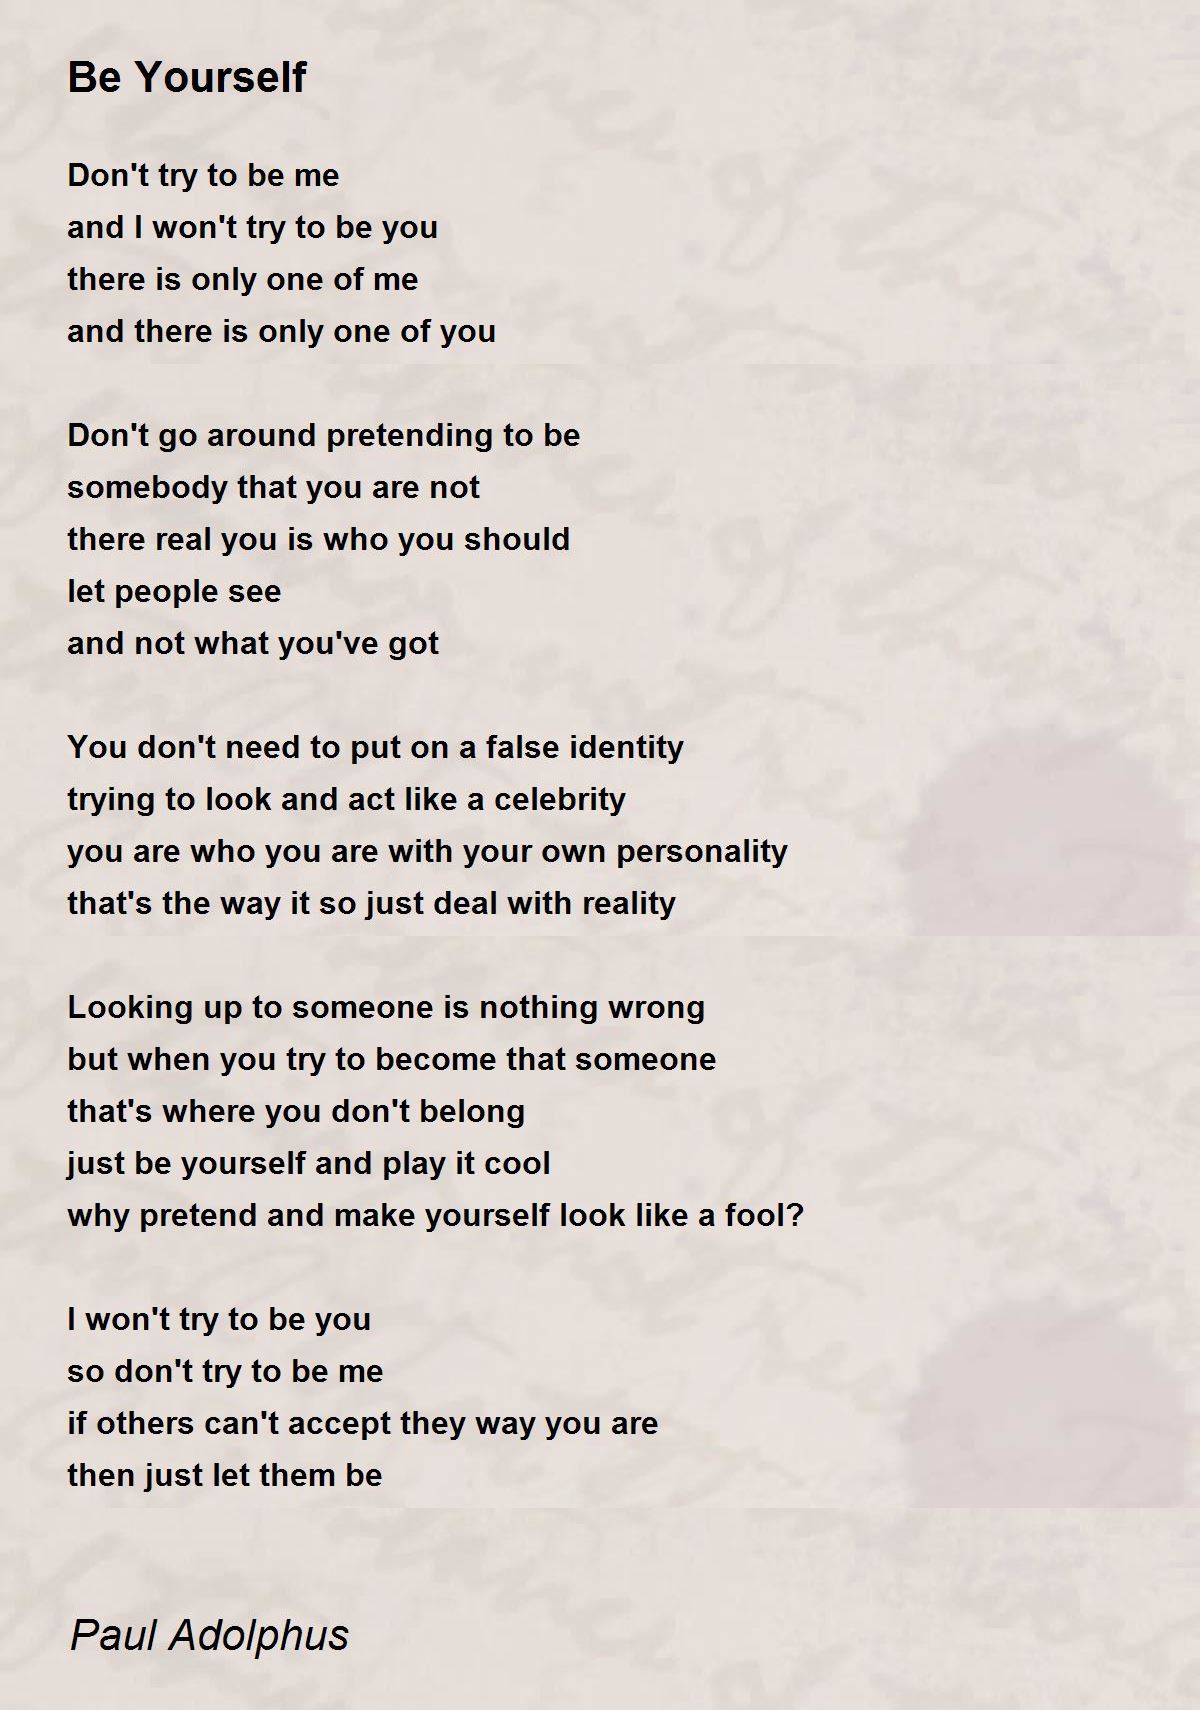 famous poems about being yourself